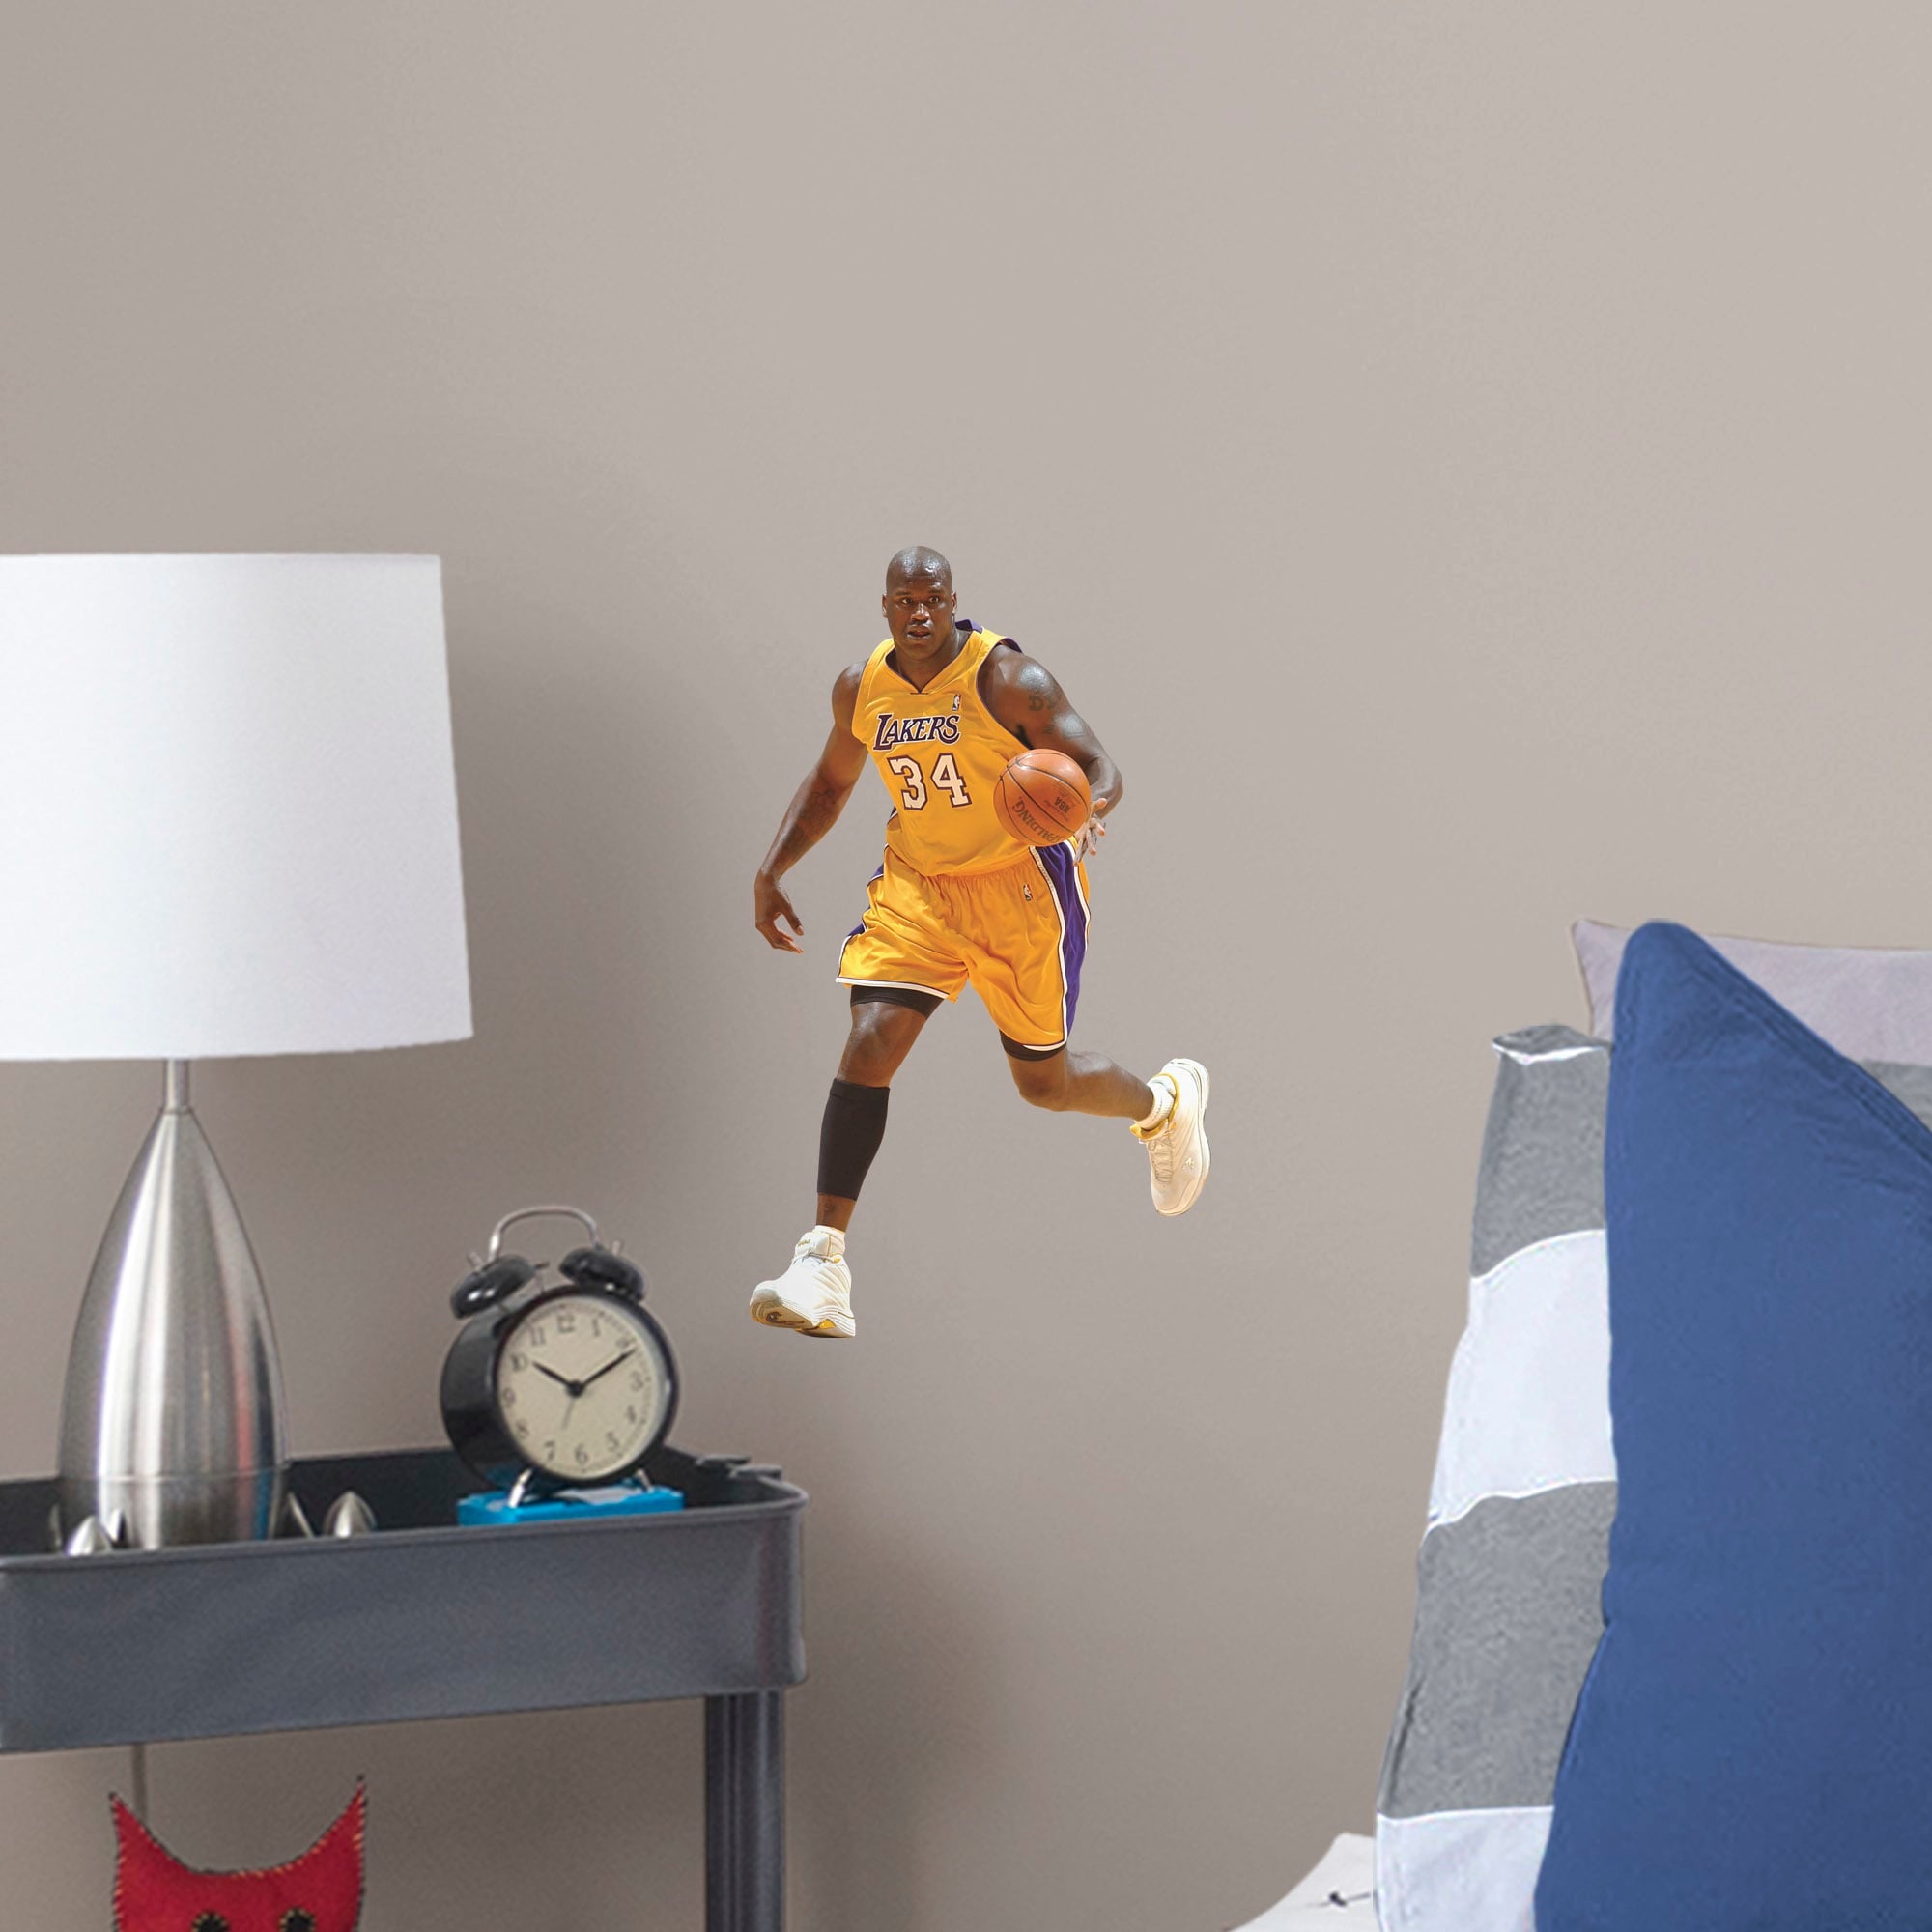 Shaquille ONeal for Los Angeles Lakers - Officially Licensed NBA Removable Wall Decal Large by Fathead | Vinyl